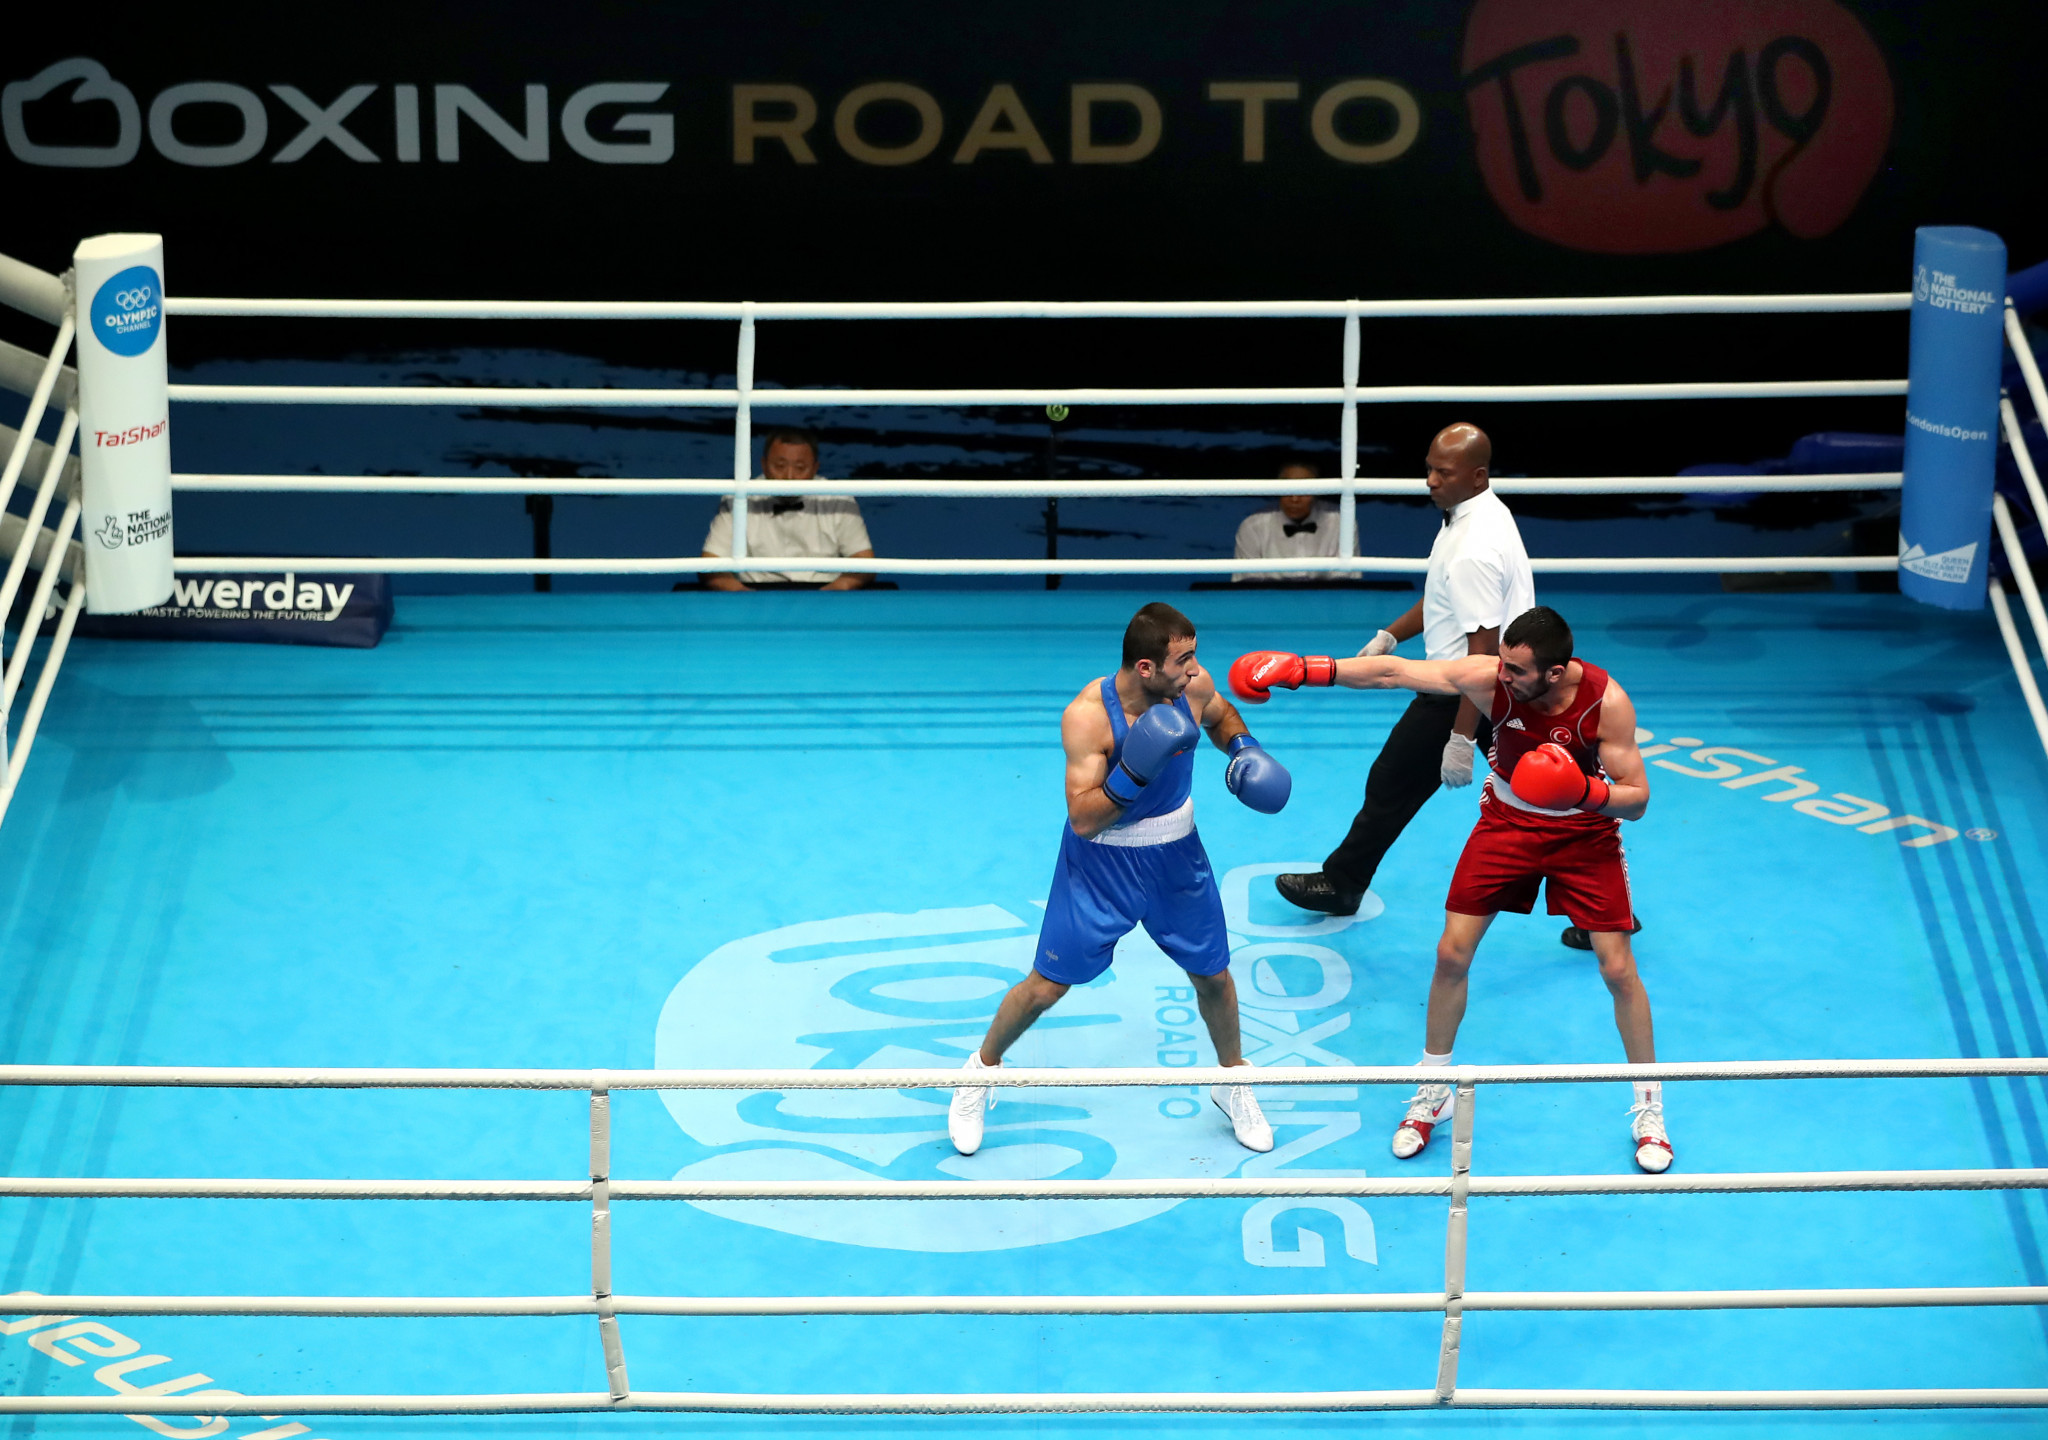 Umar Kremlev used the Tokyo 2020 European boxing qualifier in London as a reason for his doubts about Tokyo 2020 ©Getty Images 